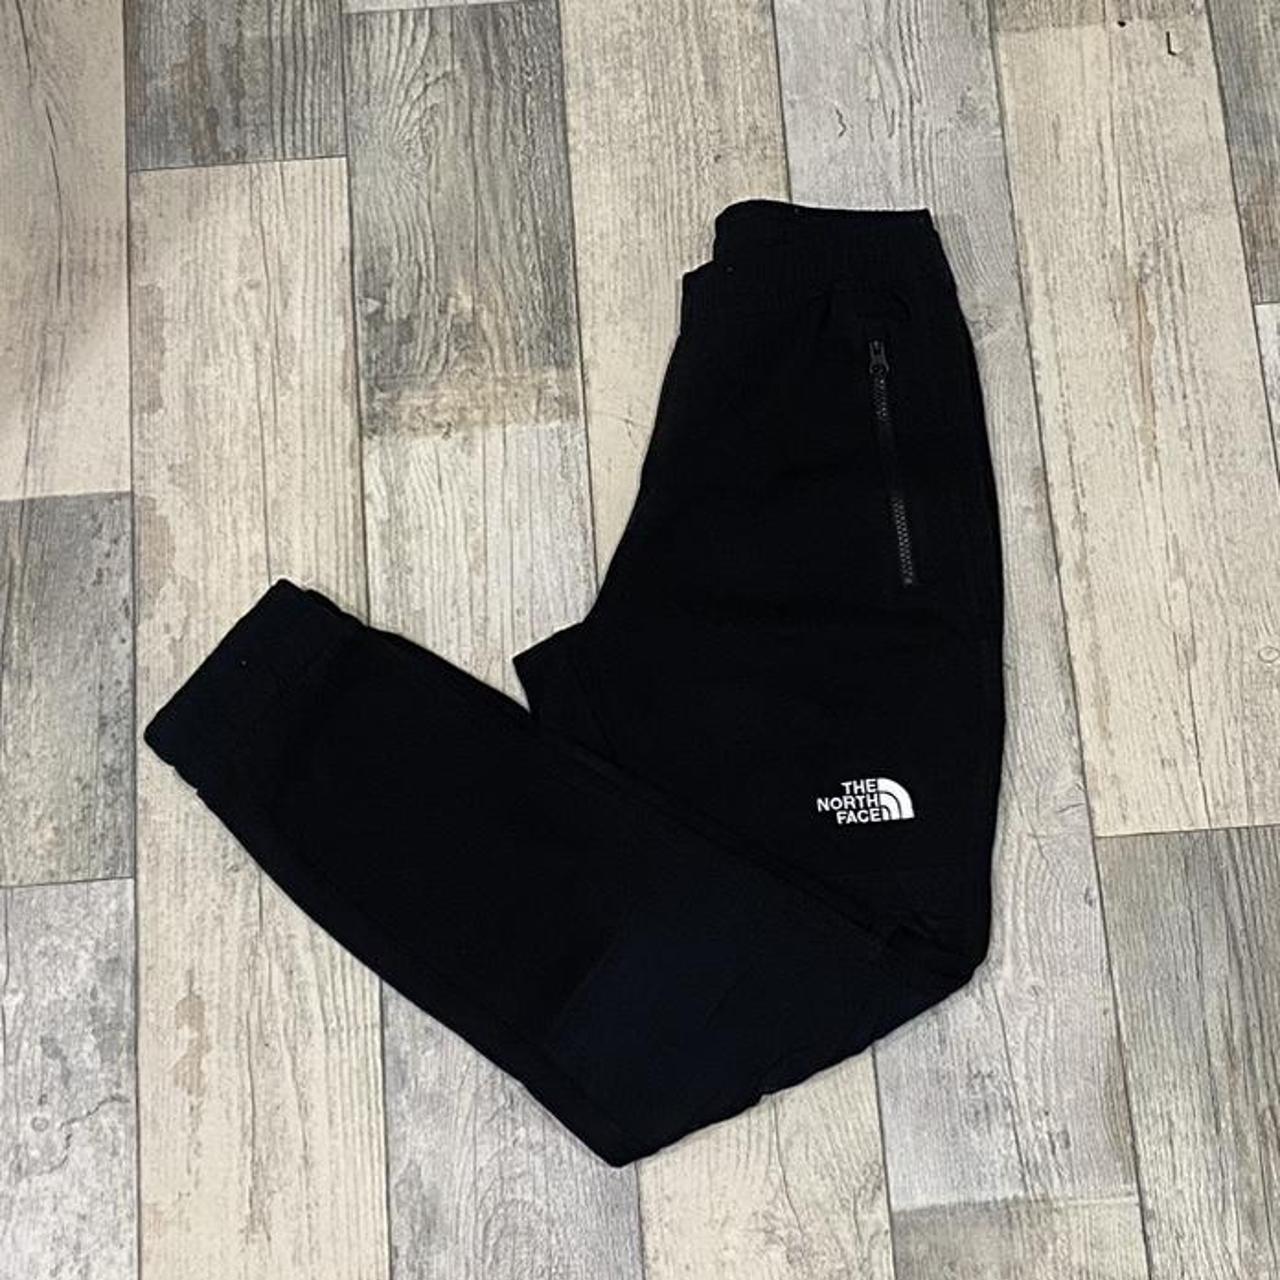 The North Face Women's Black Joggers-tracksuits | Depop